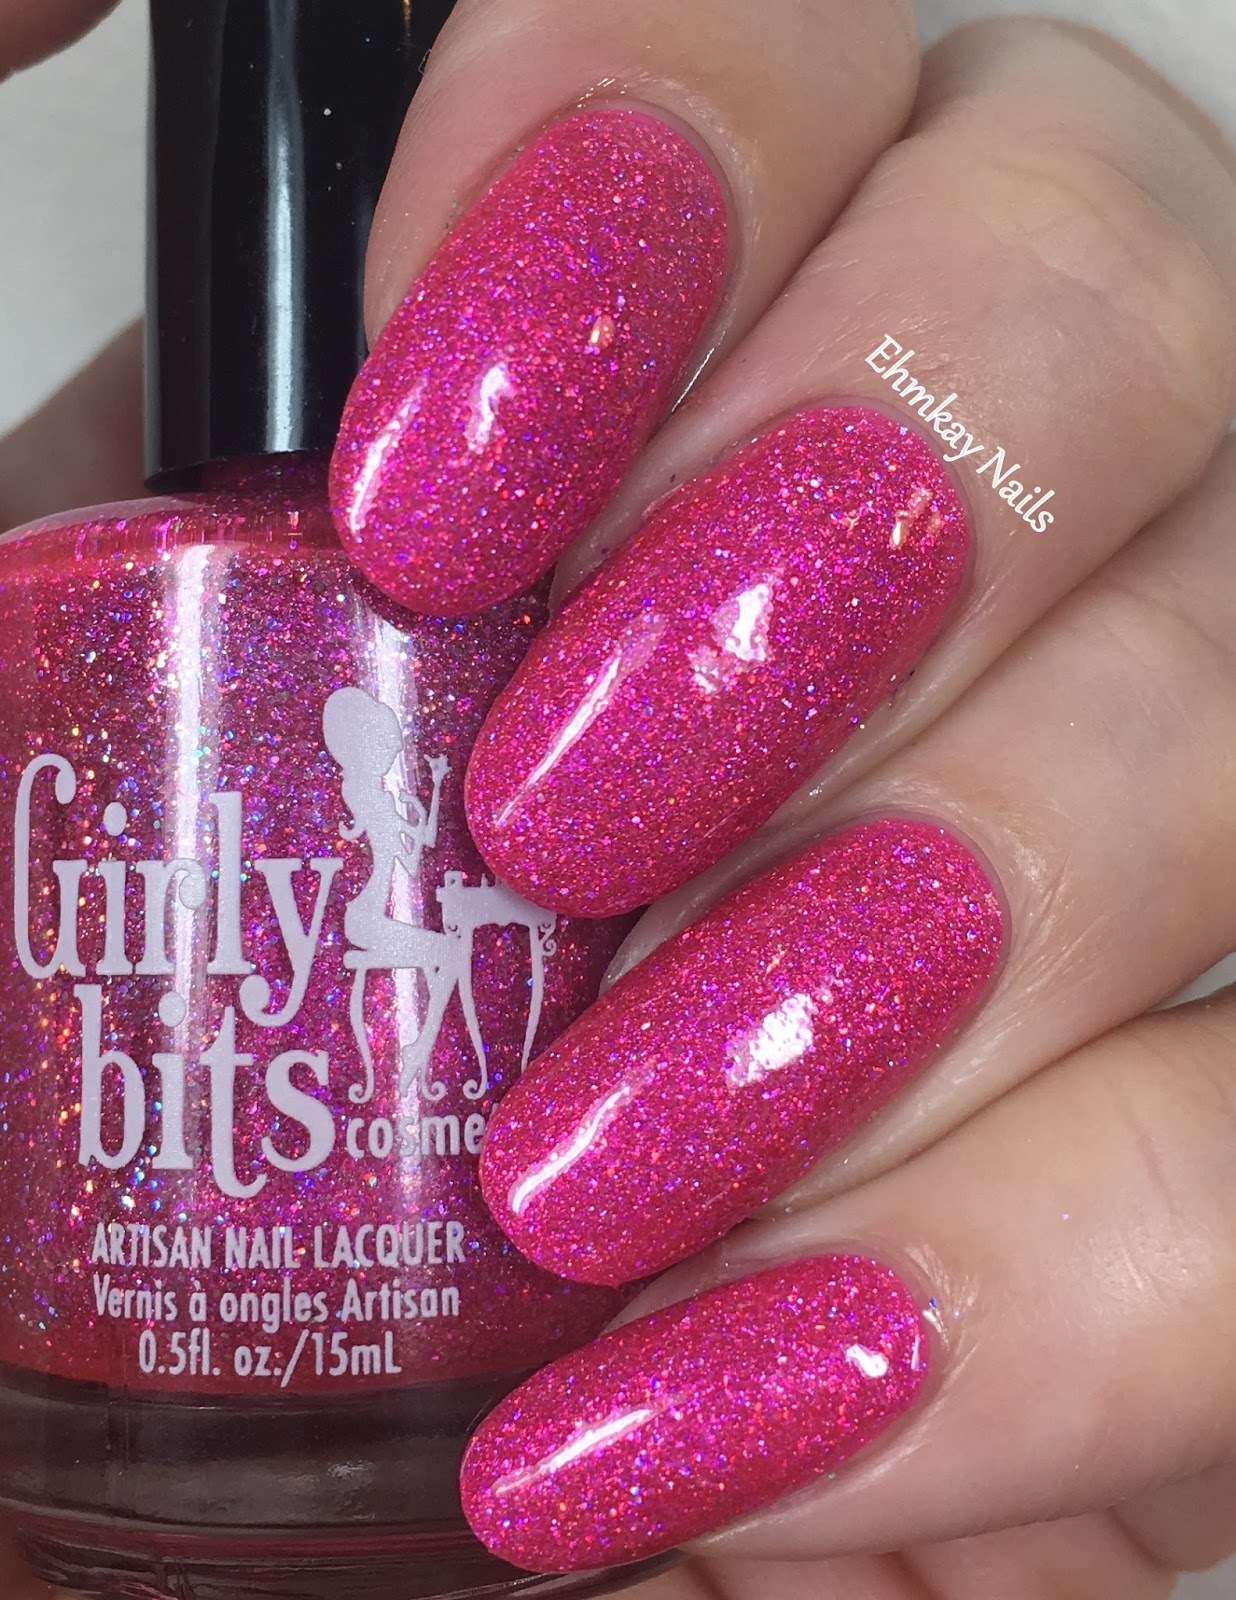 ehmkay nails: Girly Bits Sequins & Satin Pants, Swatches and Review